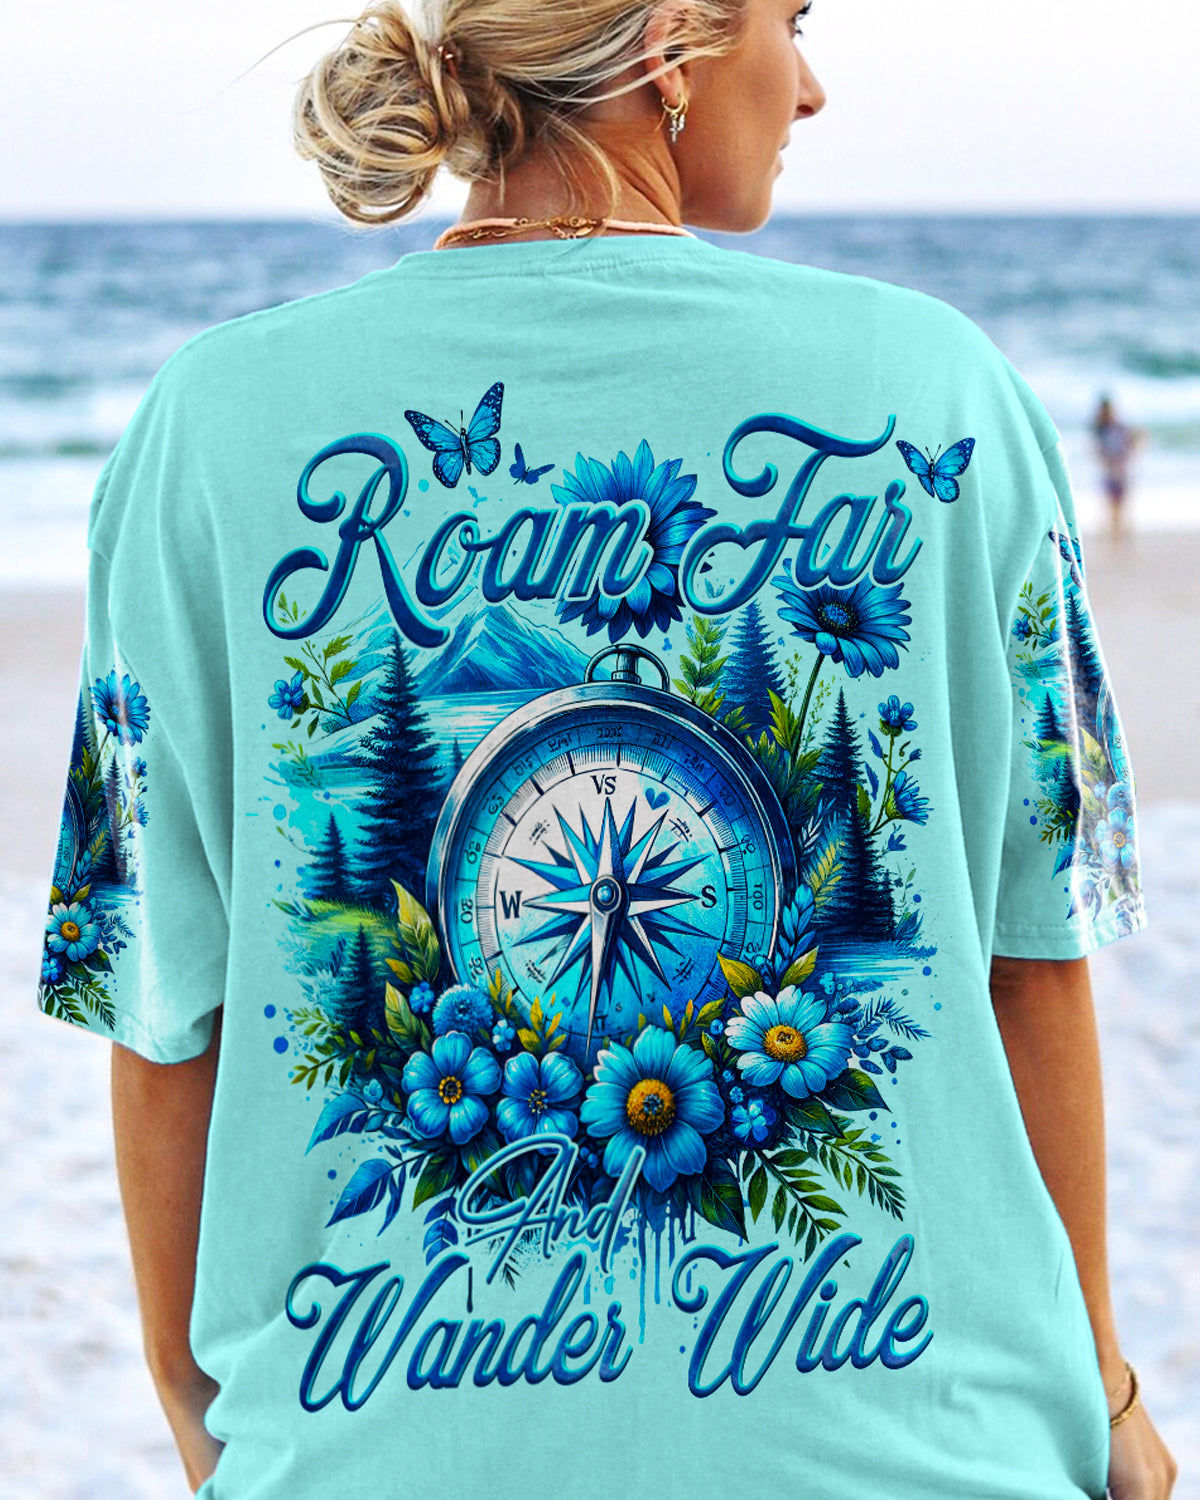 ROAM FAR AND WANDER WIDE COMPASS ALL OVER PRINT - TY0212234